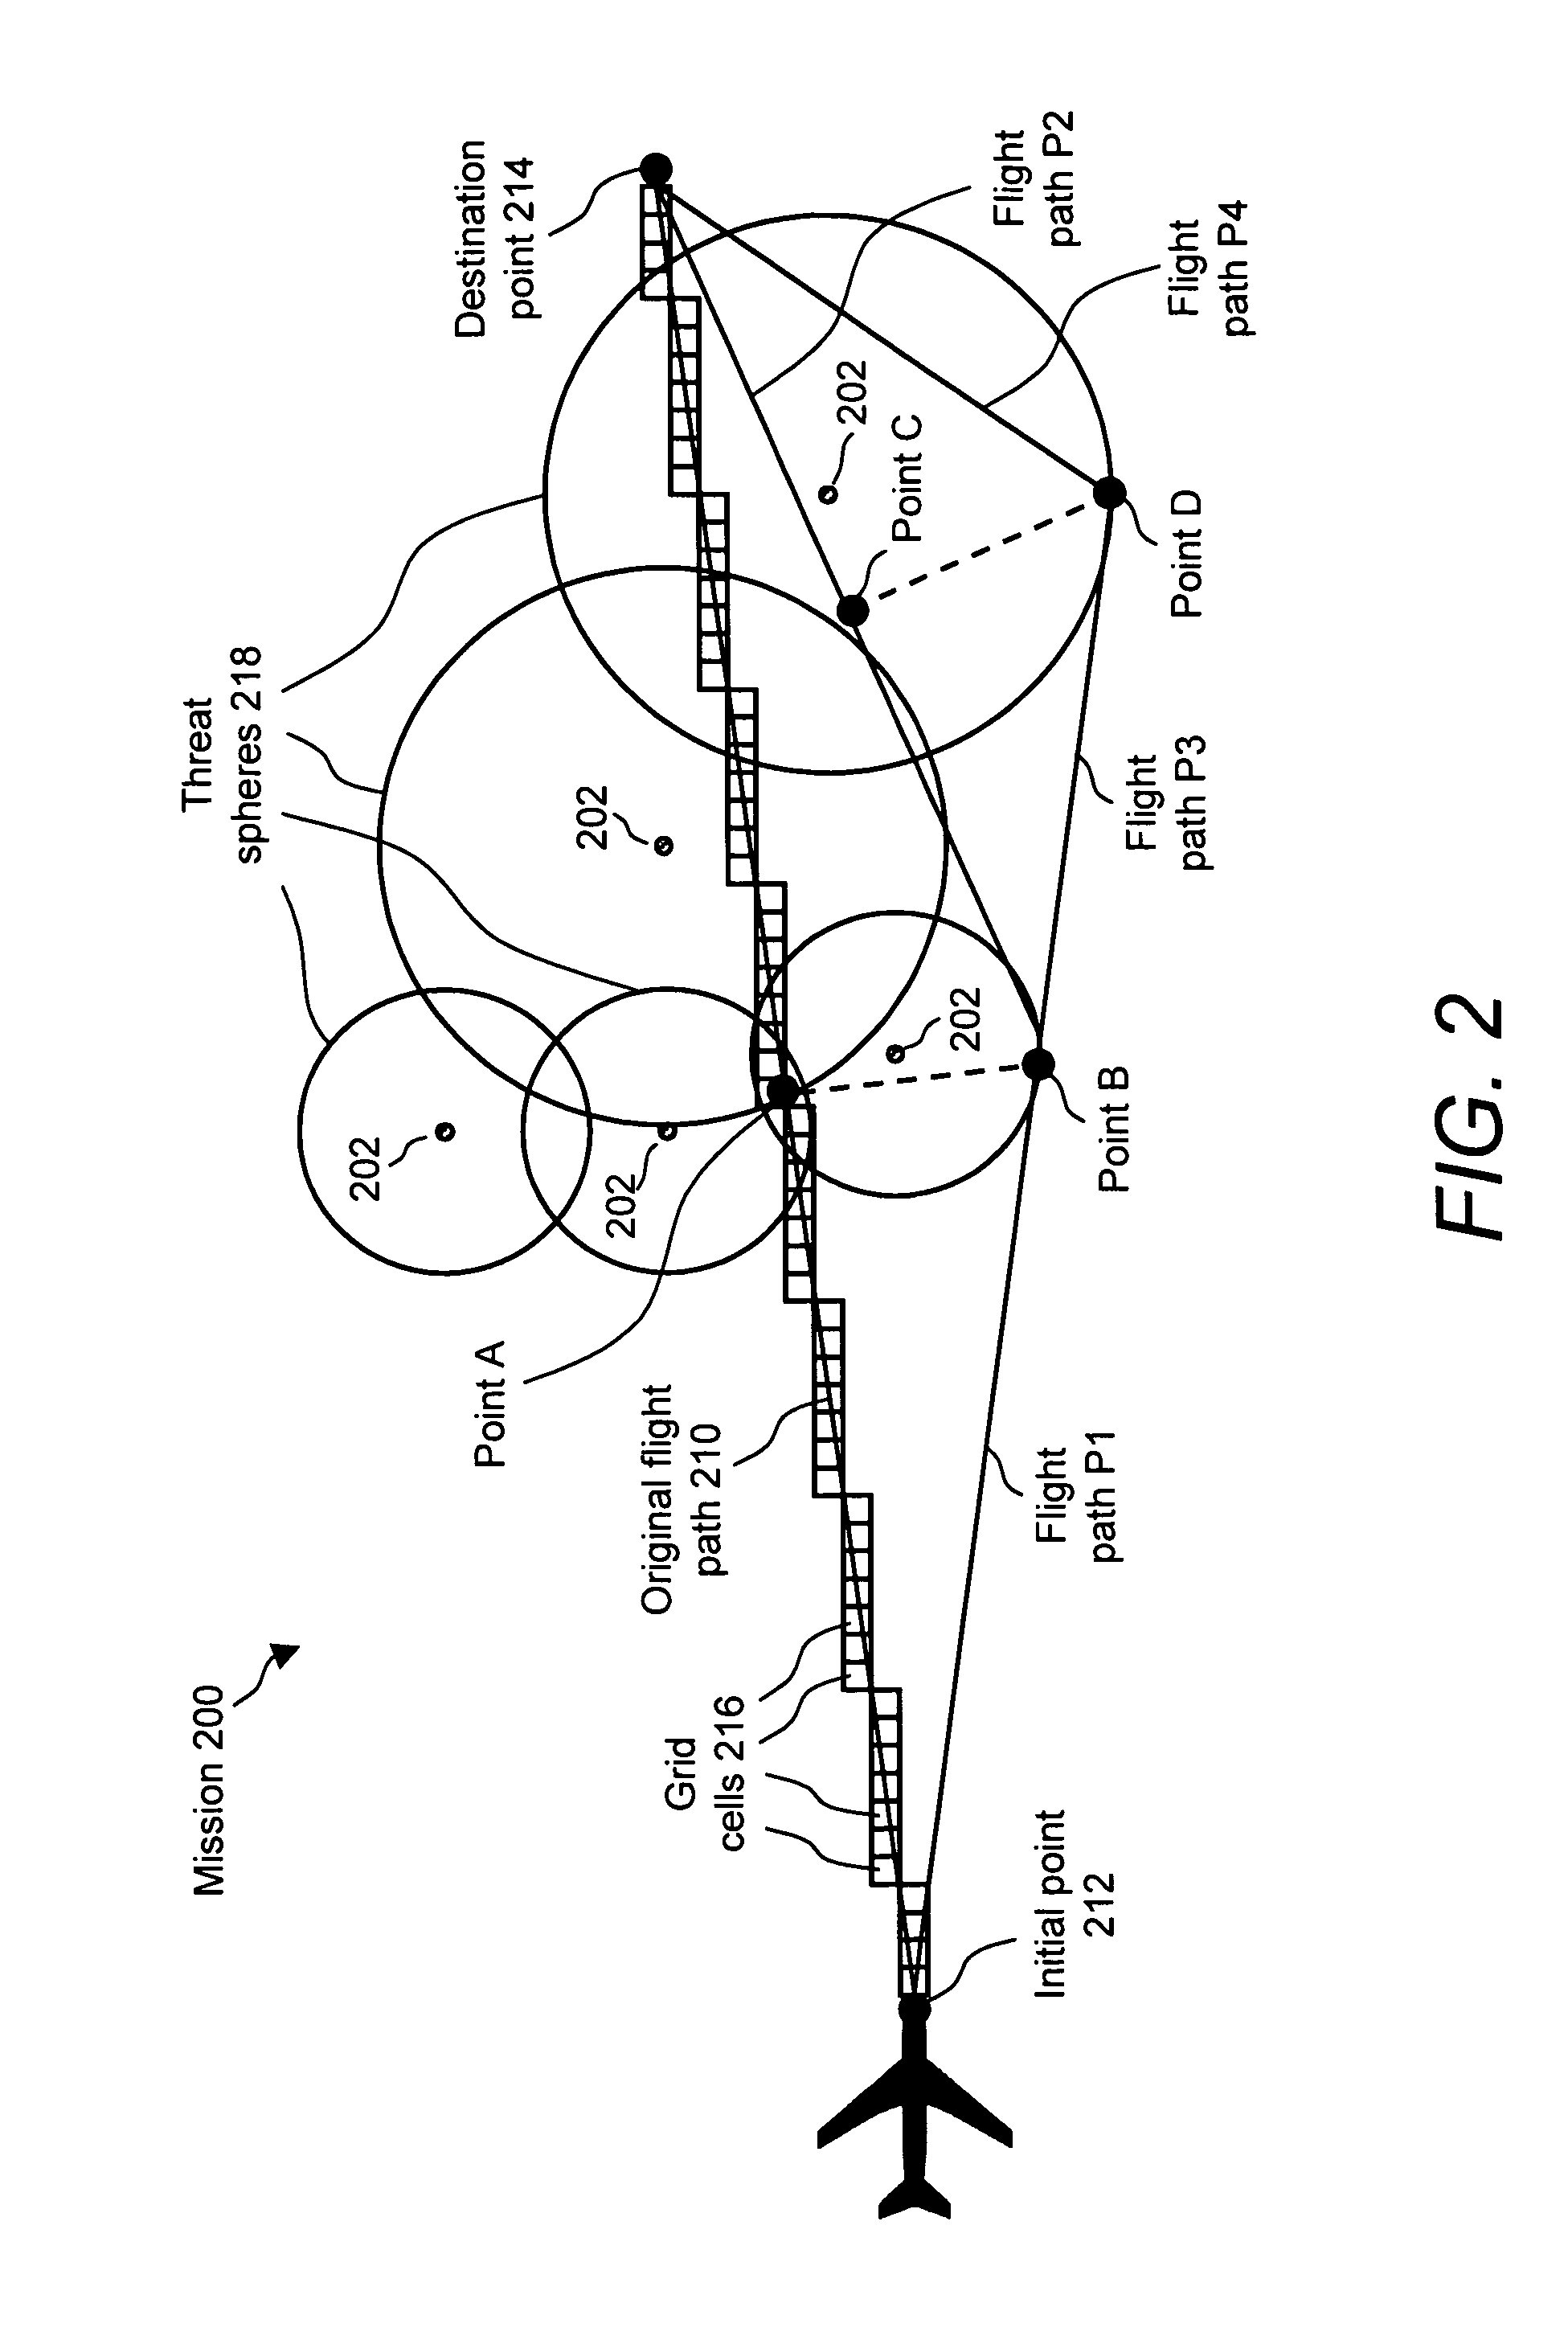 Method and system for route planning of aircraft using rule-based expert system and threat assessment